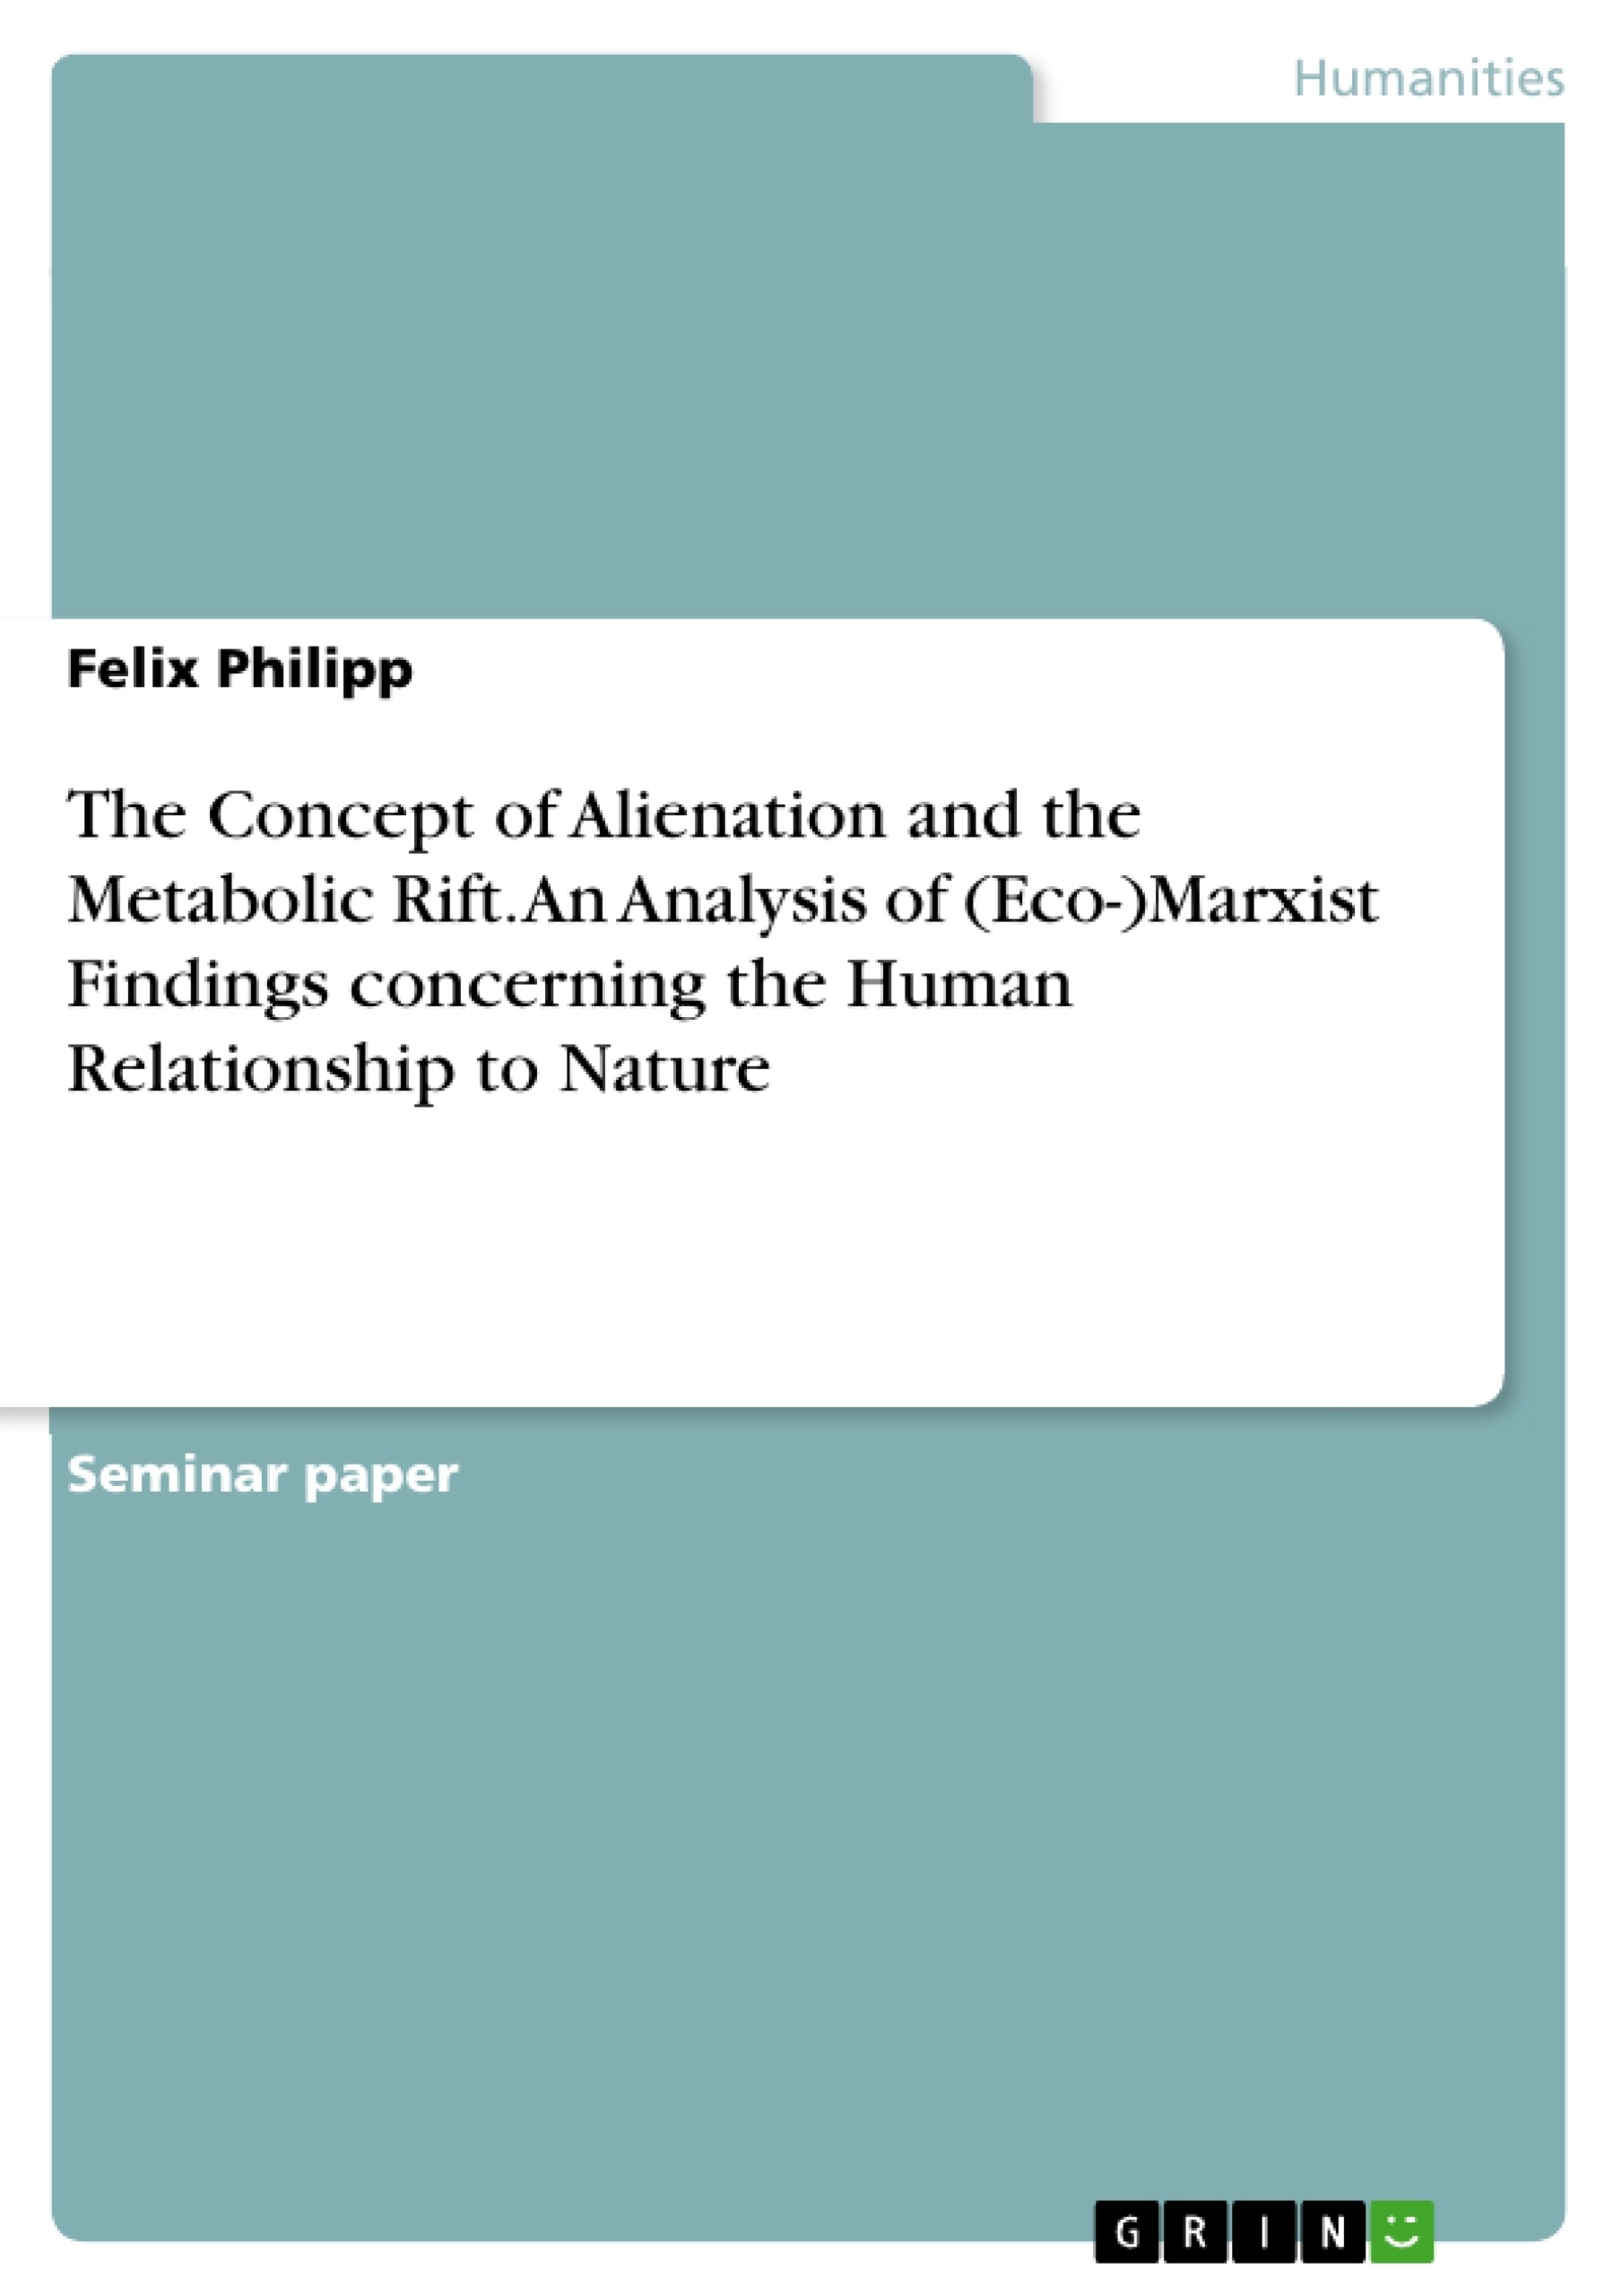 Title: The Concept of Alienation and the Metabolic Rift. An Analysis of (Eco-)Marxist Findings concerning the Human Relationship to Nature